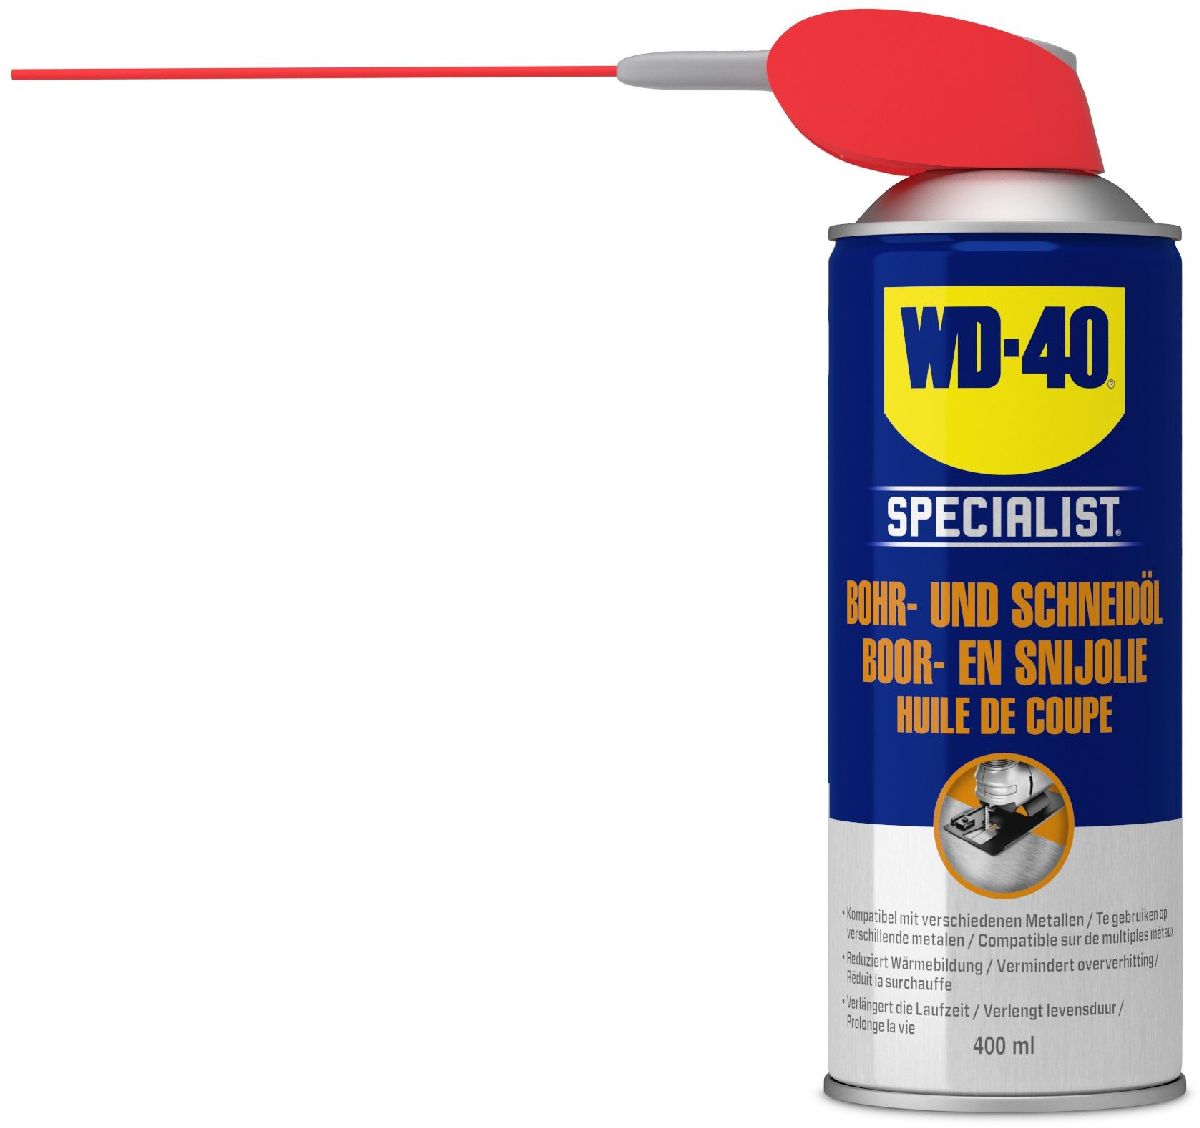 WD-40 Specialist huile foret/coupe 400ml avec Smart Straw